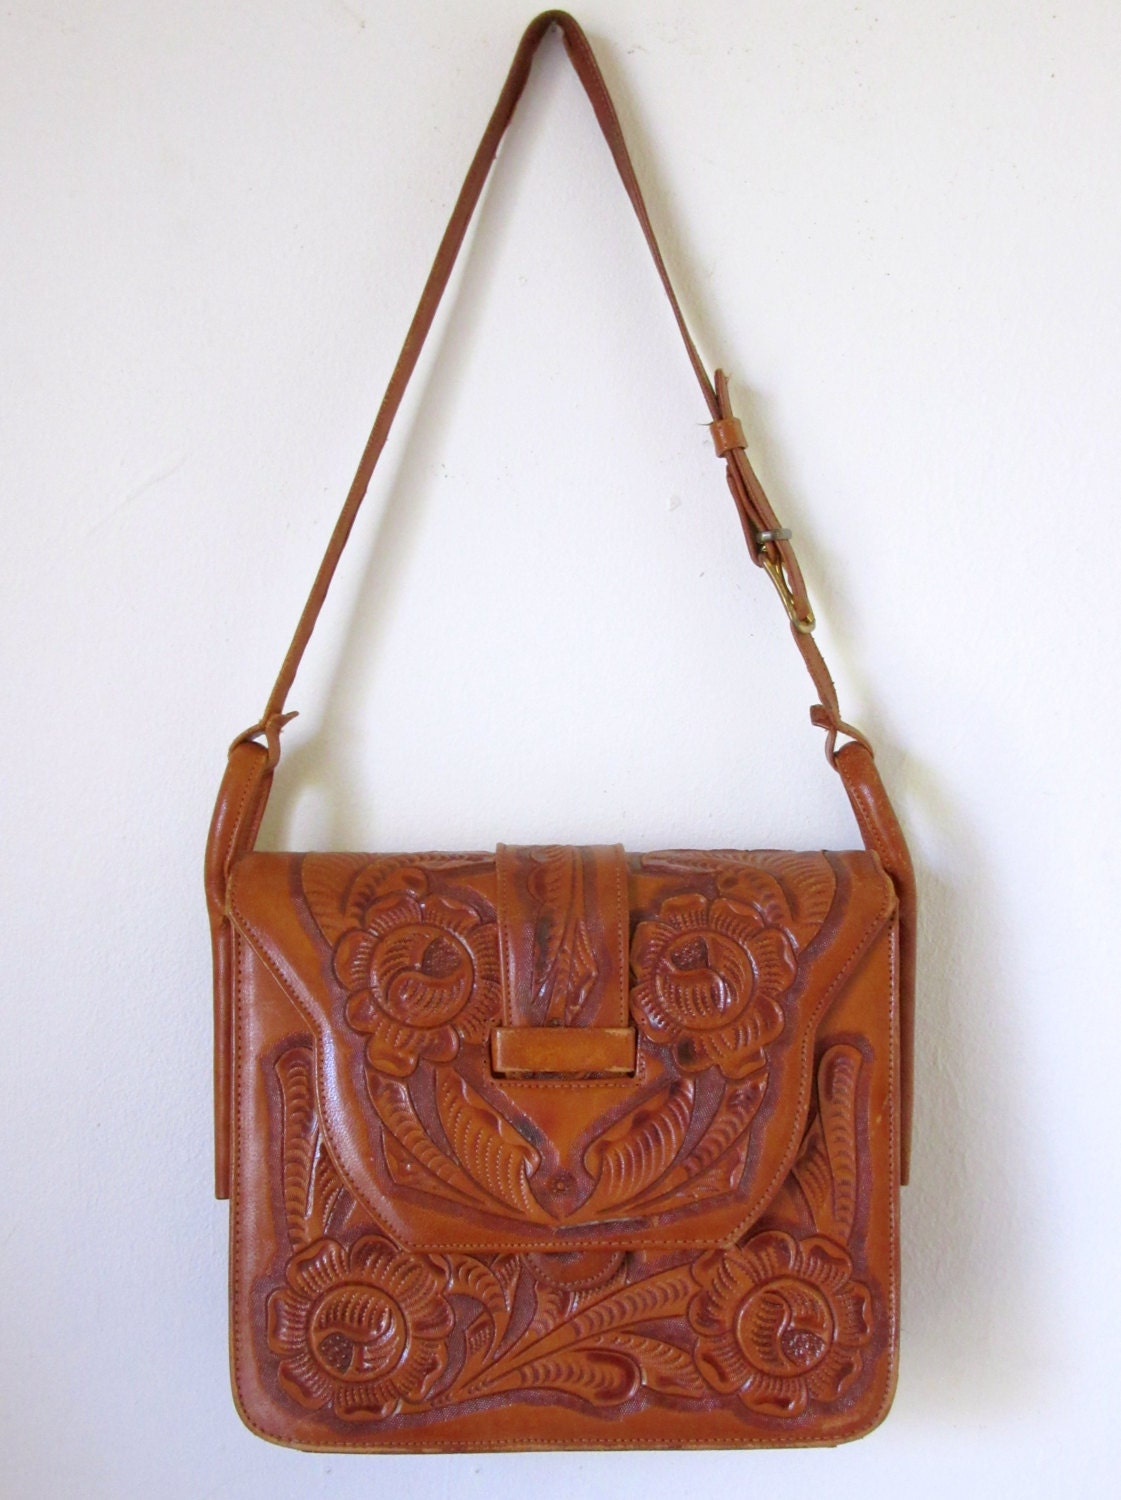 Beautiful tooled leather handbag purse Artmex Mexican carved